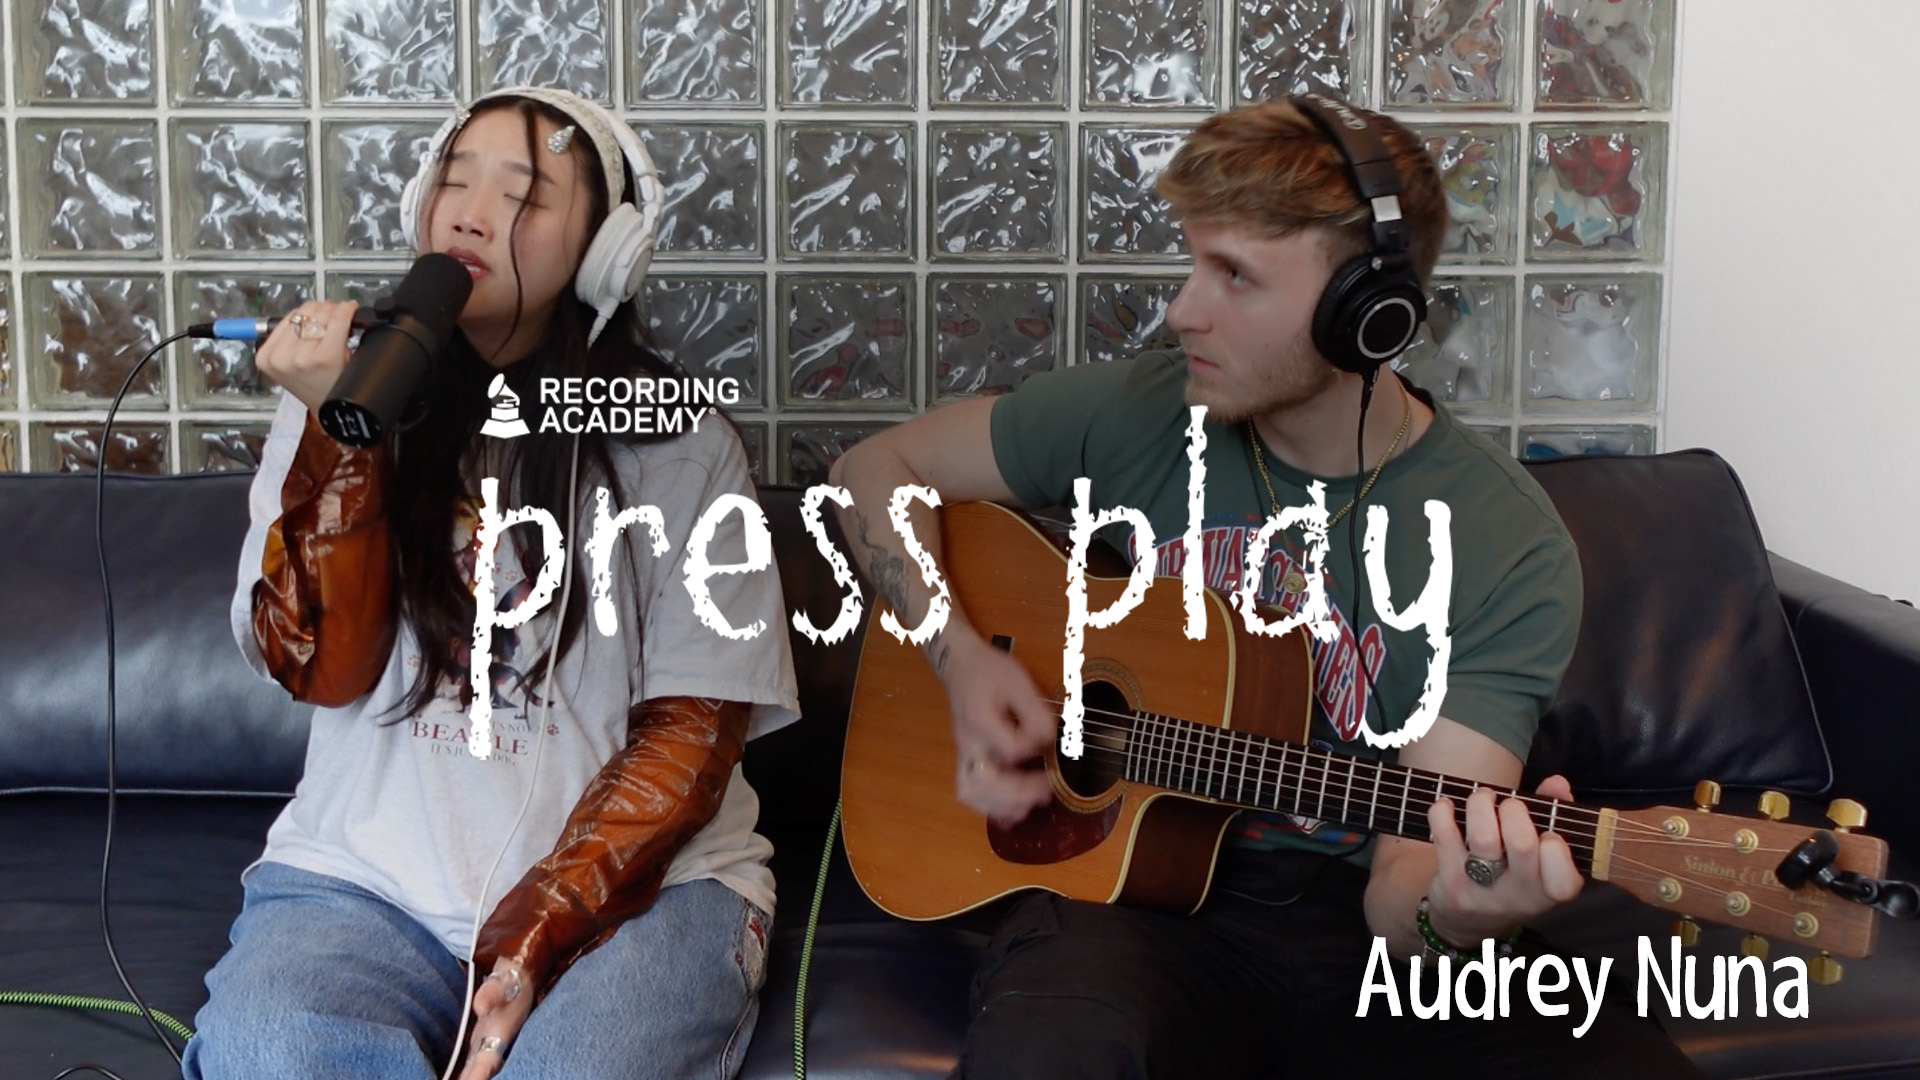 Watch Audrey Nuna Perform A Breezy Acoustic Version Of "Starving" | Press Play